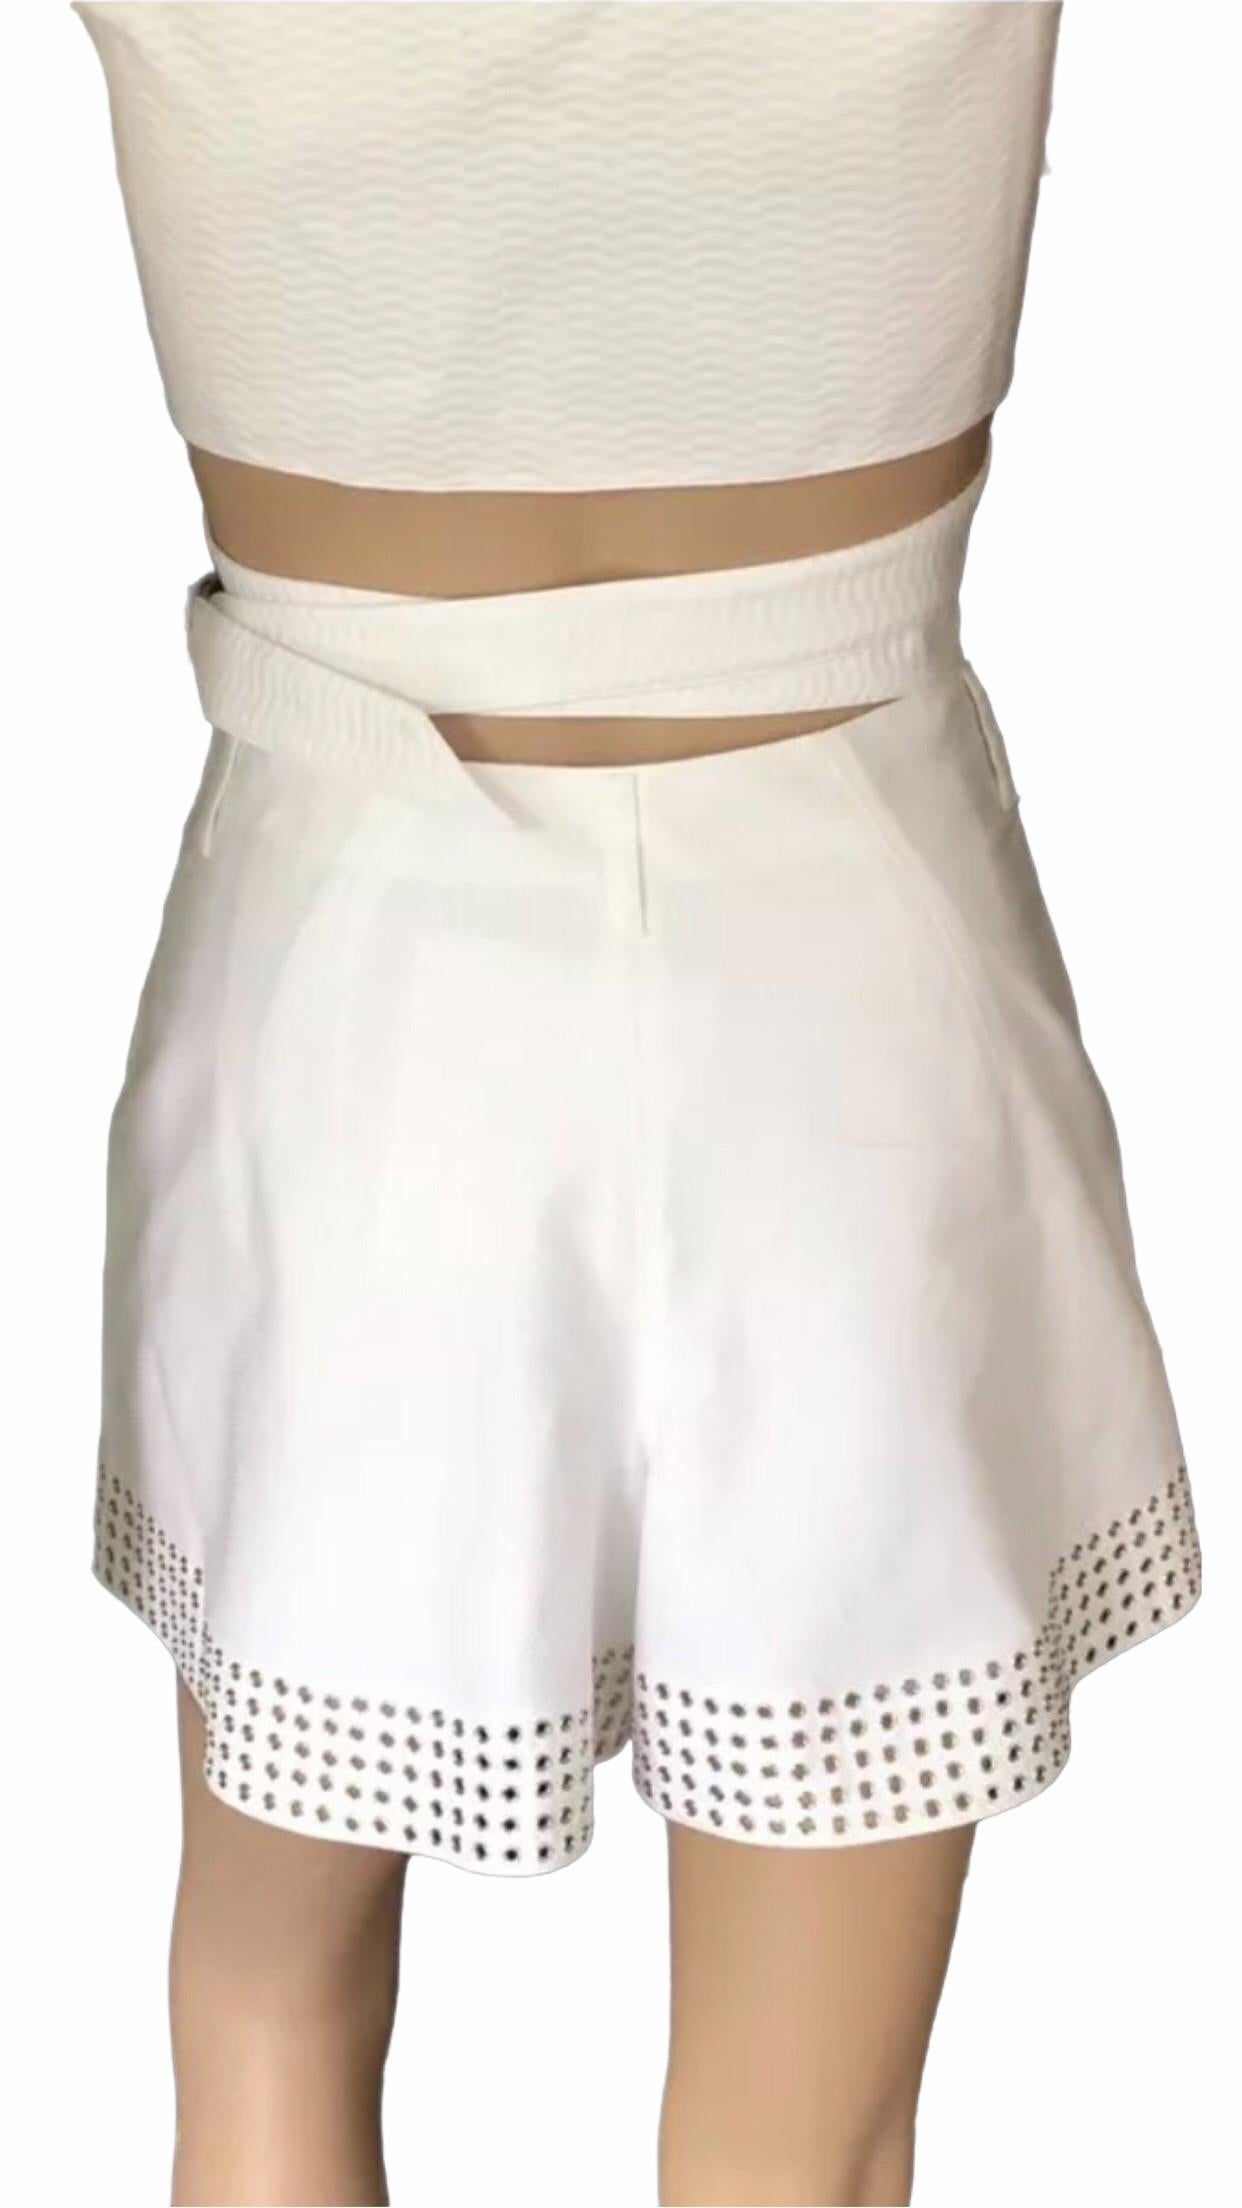 New Azzedine Alaia Embellished White Mini Skort Shorts and Bra Top 2 Piece Set In New Condition For Sale In Naples, FL